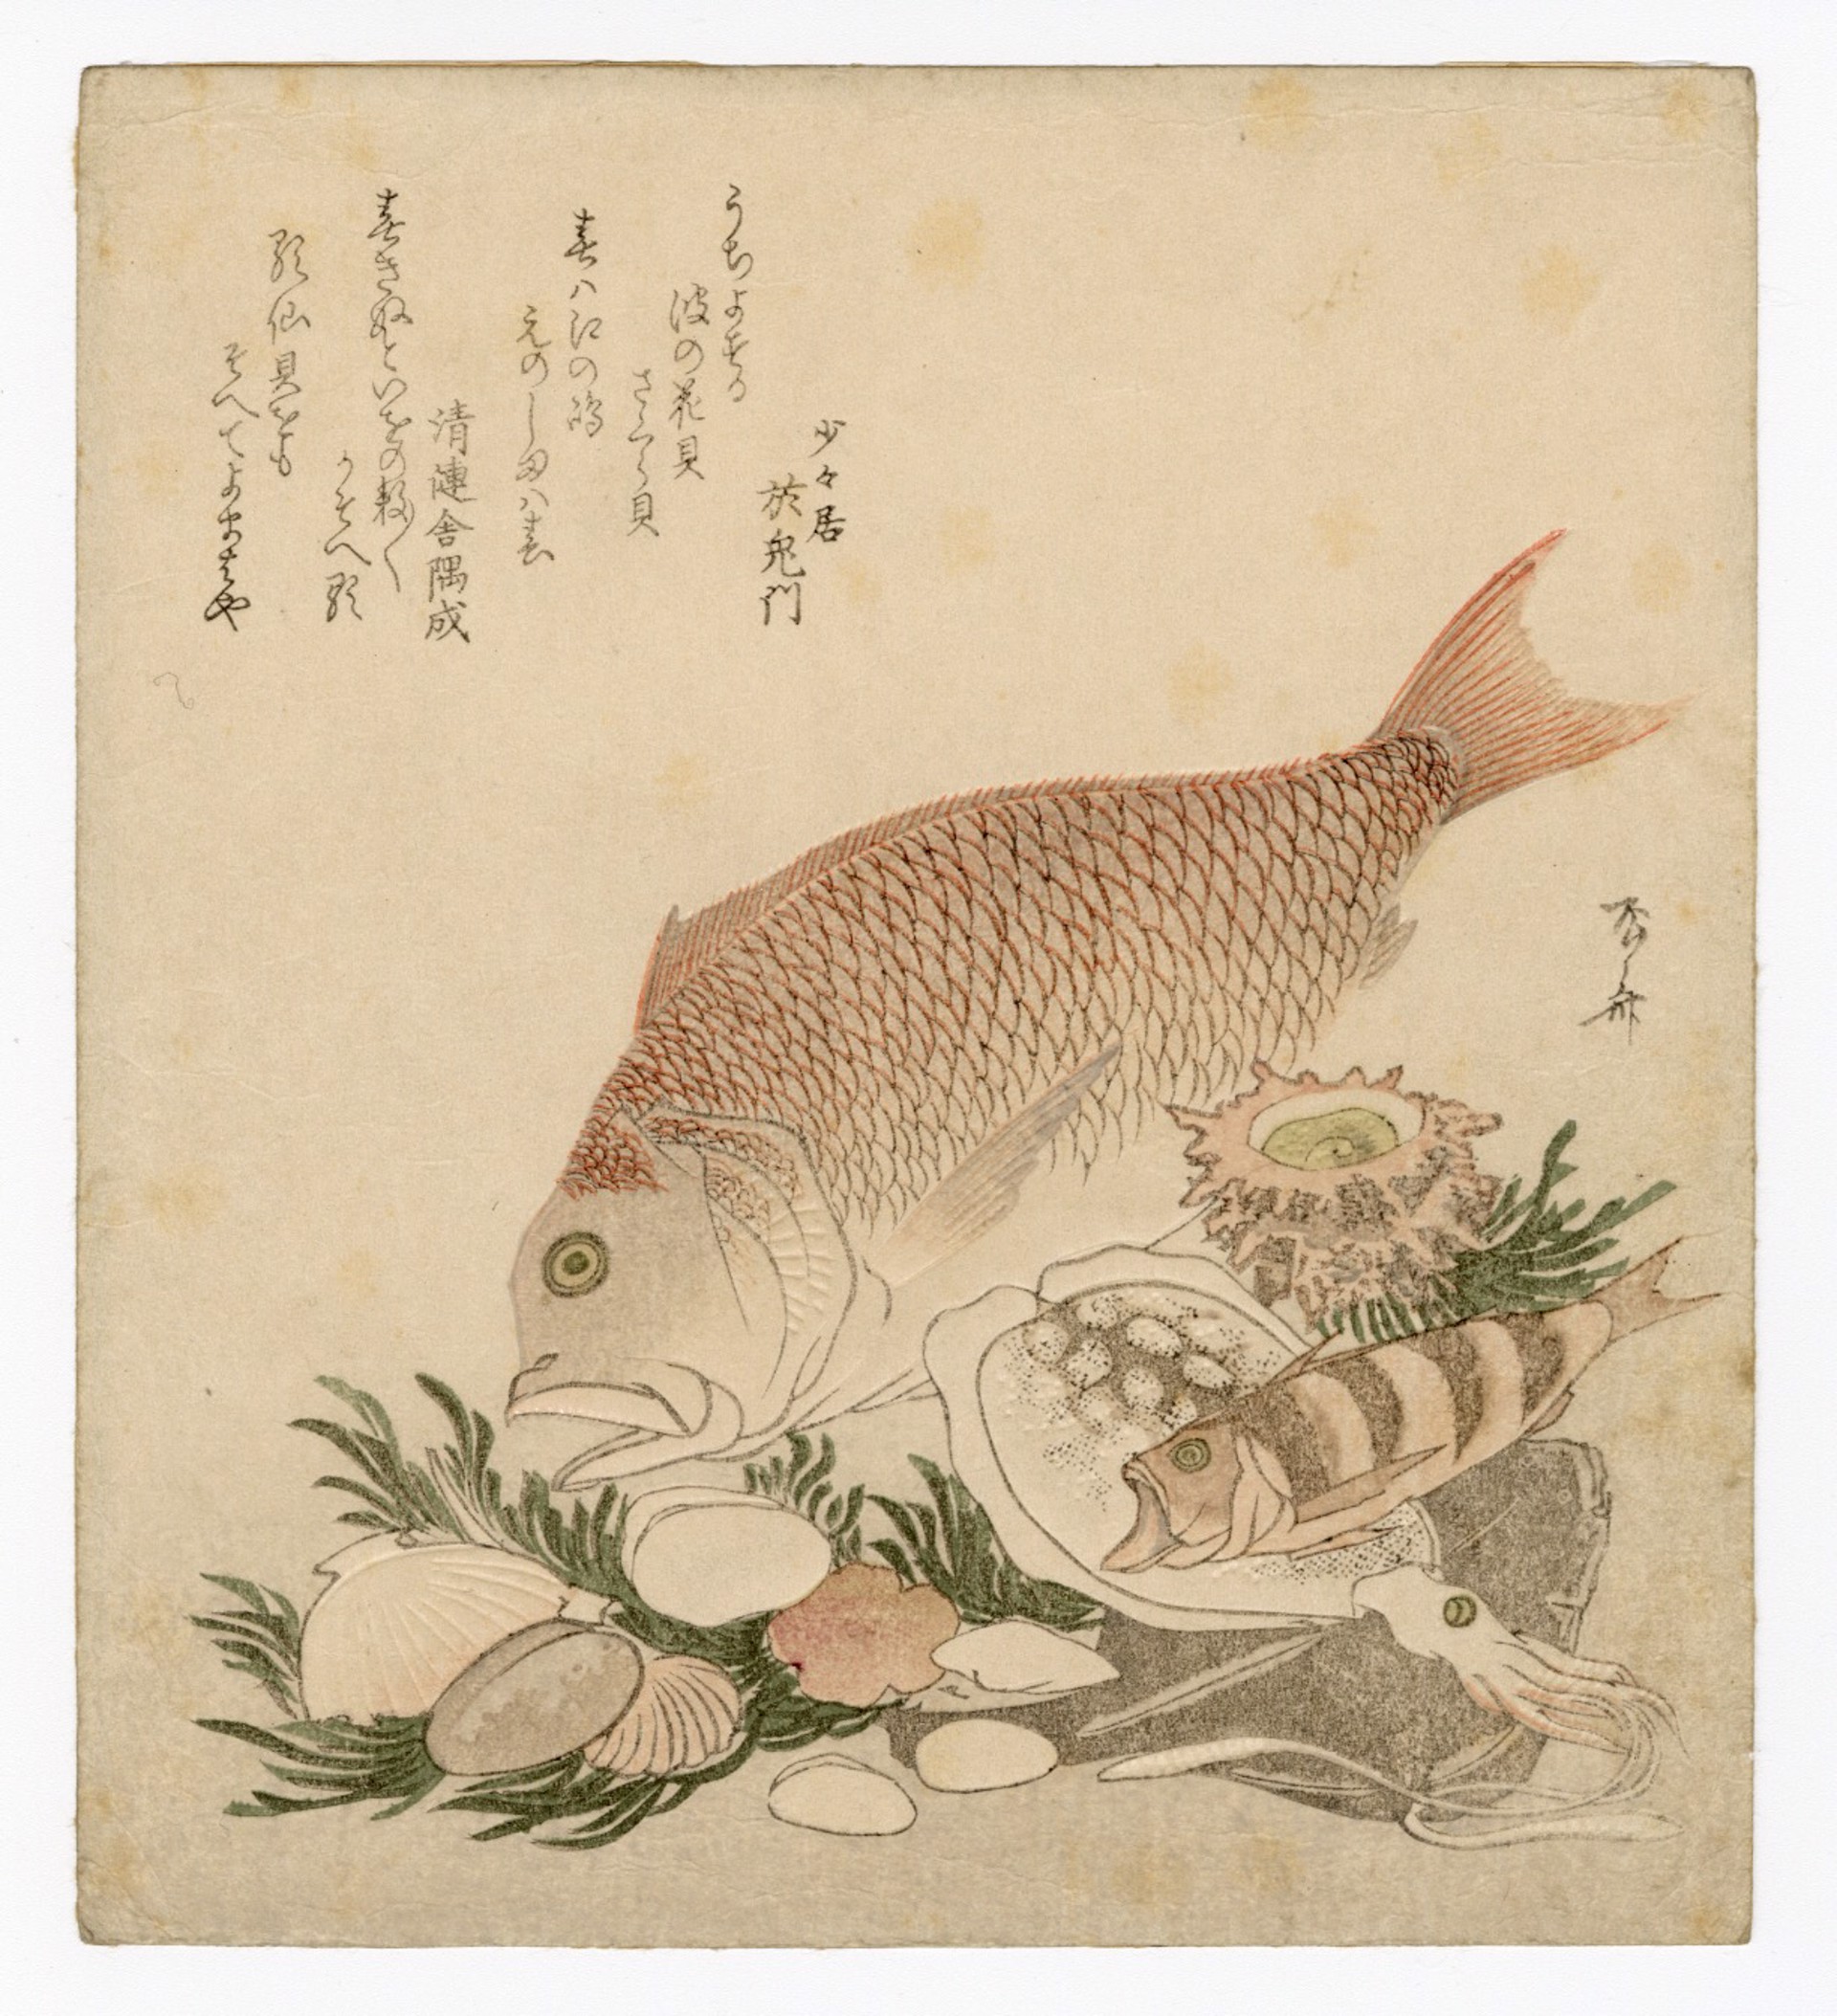 Fishes and Shells by Shinsai